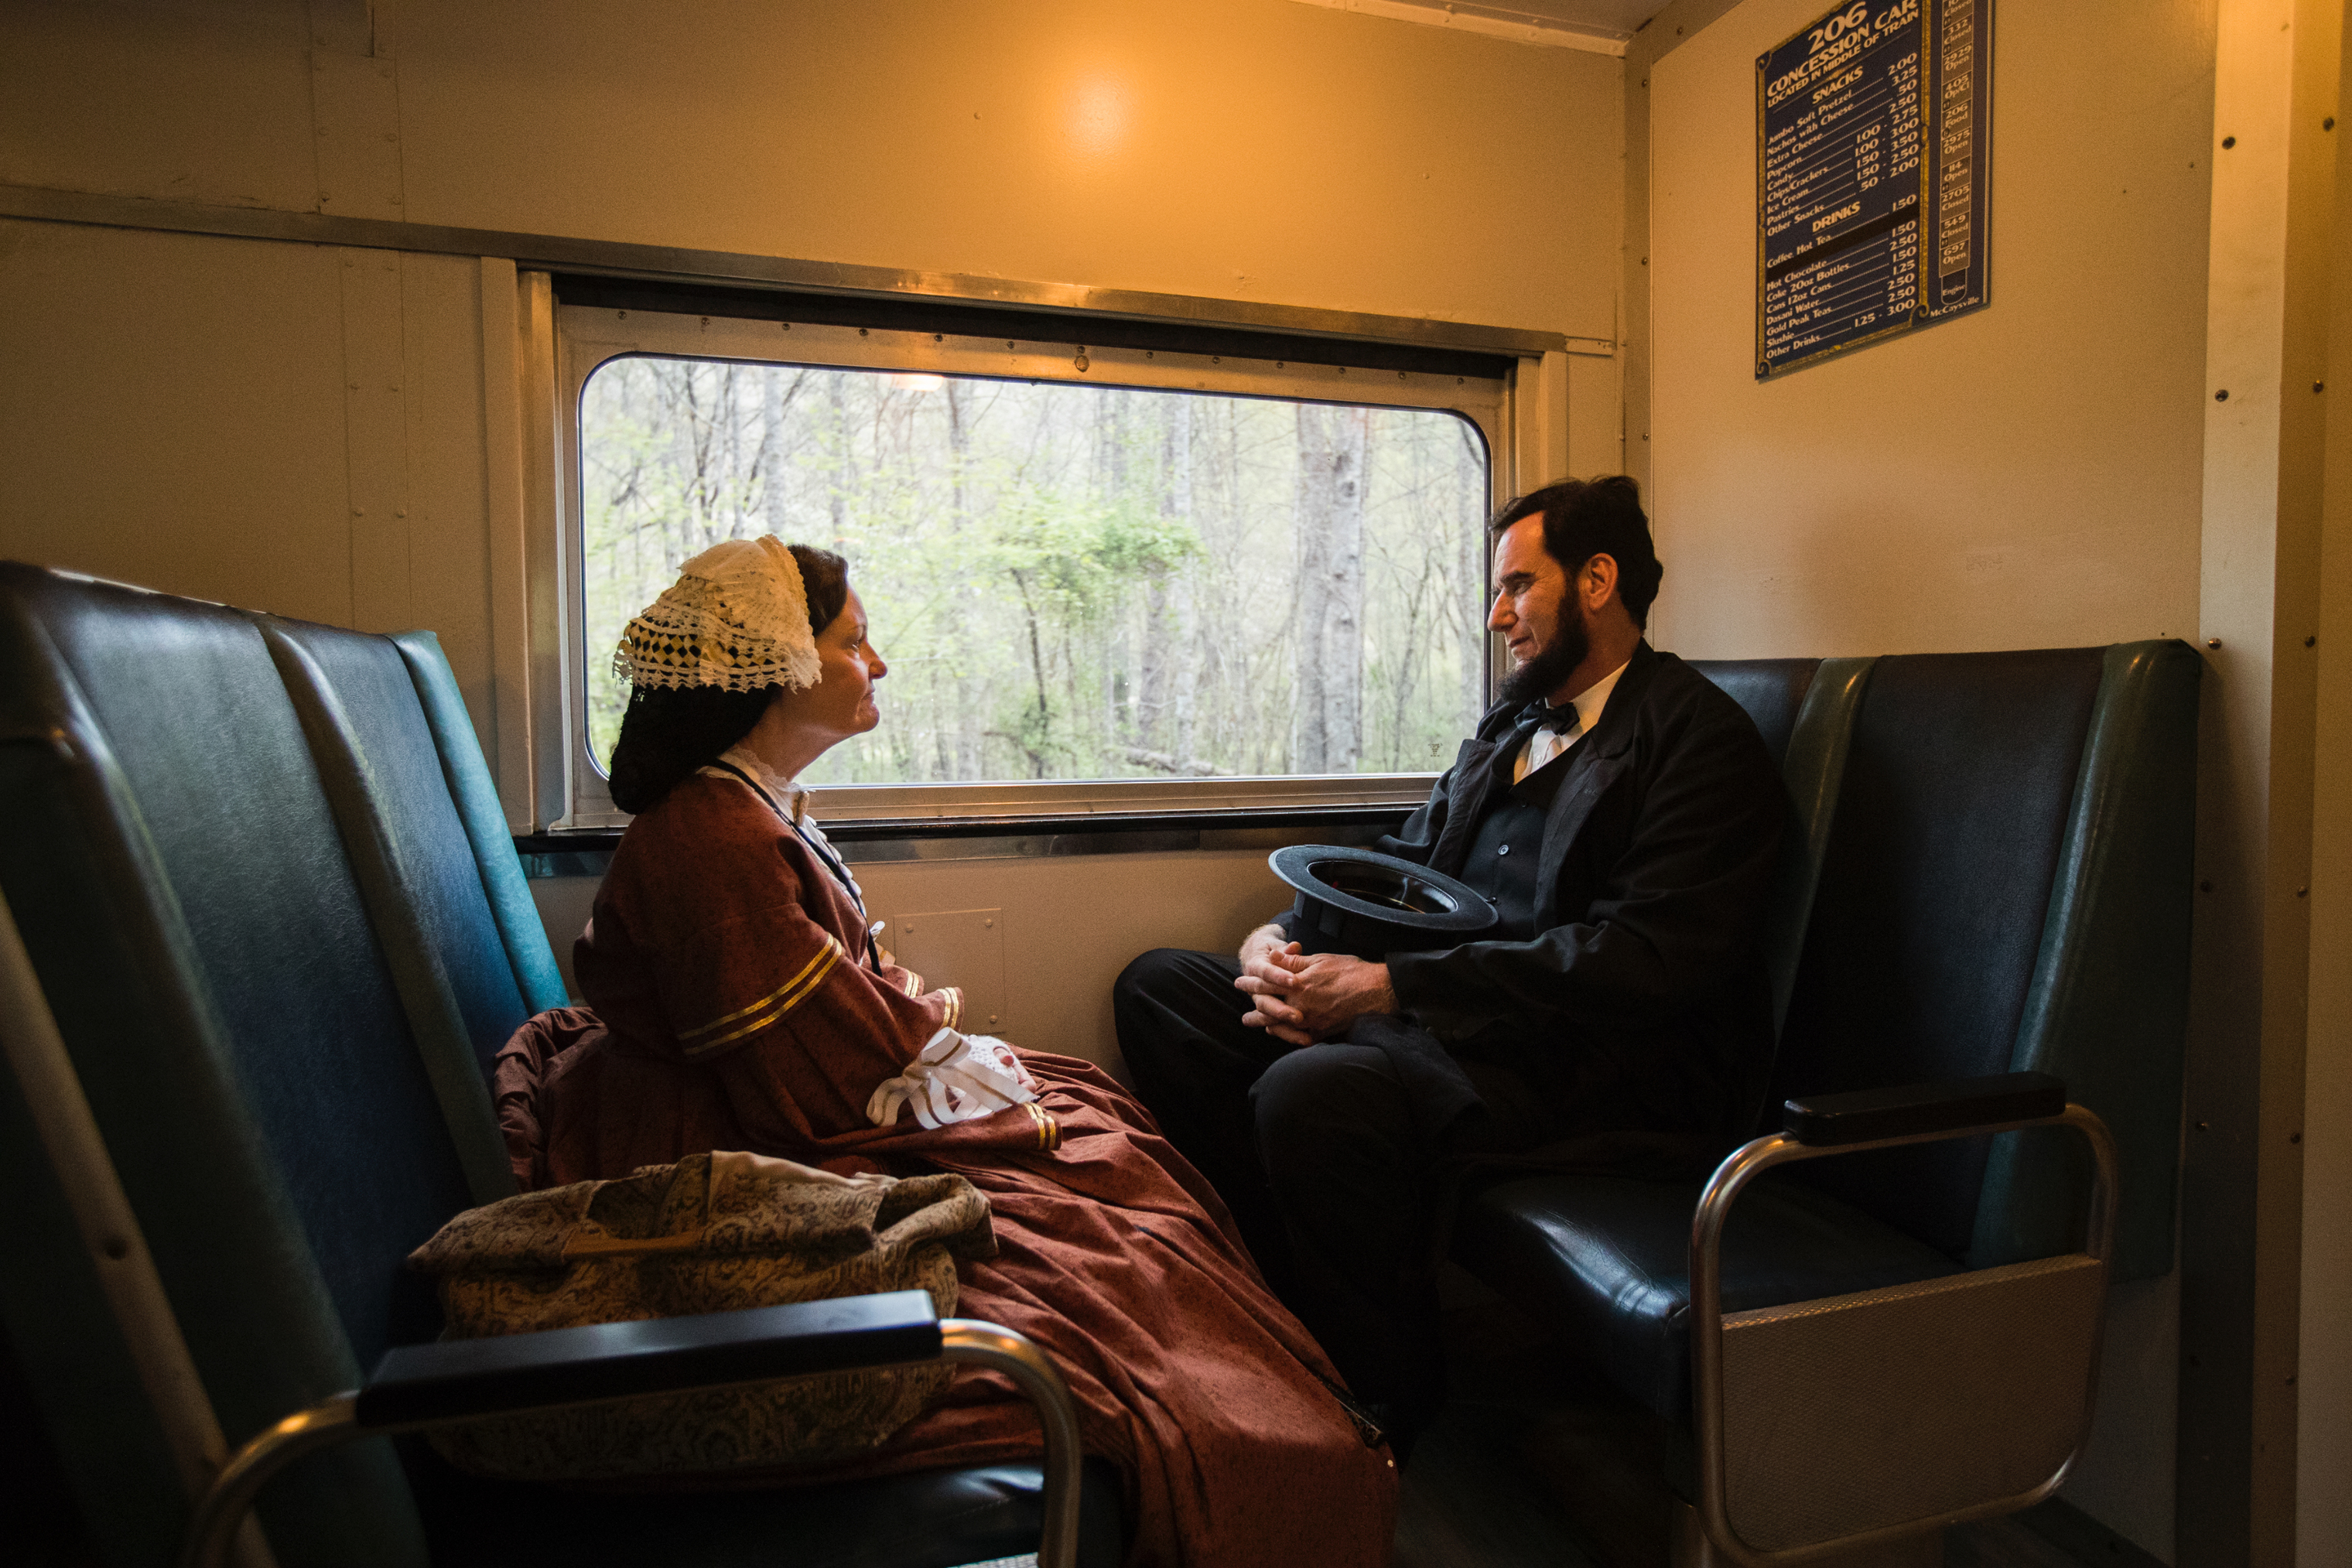 Members of the Lincoln Presenters conference take the scenic and historic train from Blue Ridge to McCaysville on April 12. Here, Teena Baldrige, 67, of Springboro, Ohio, chats with James Mitchell, 54, from Hope, Kan. (Benjamin Norman for TIME)